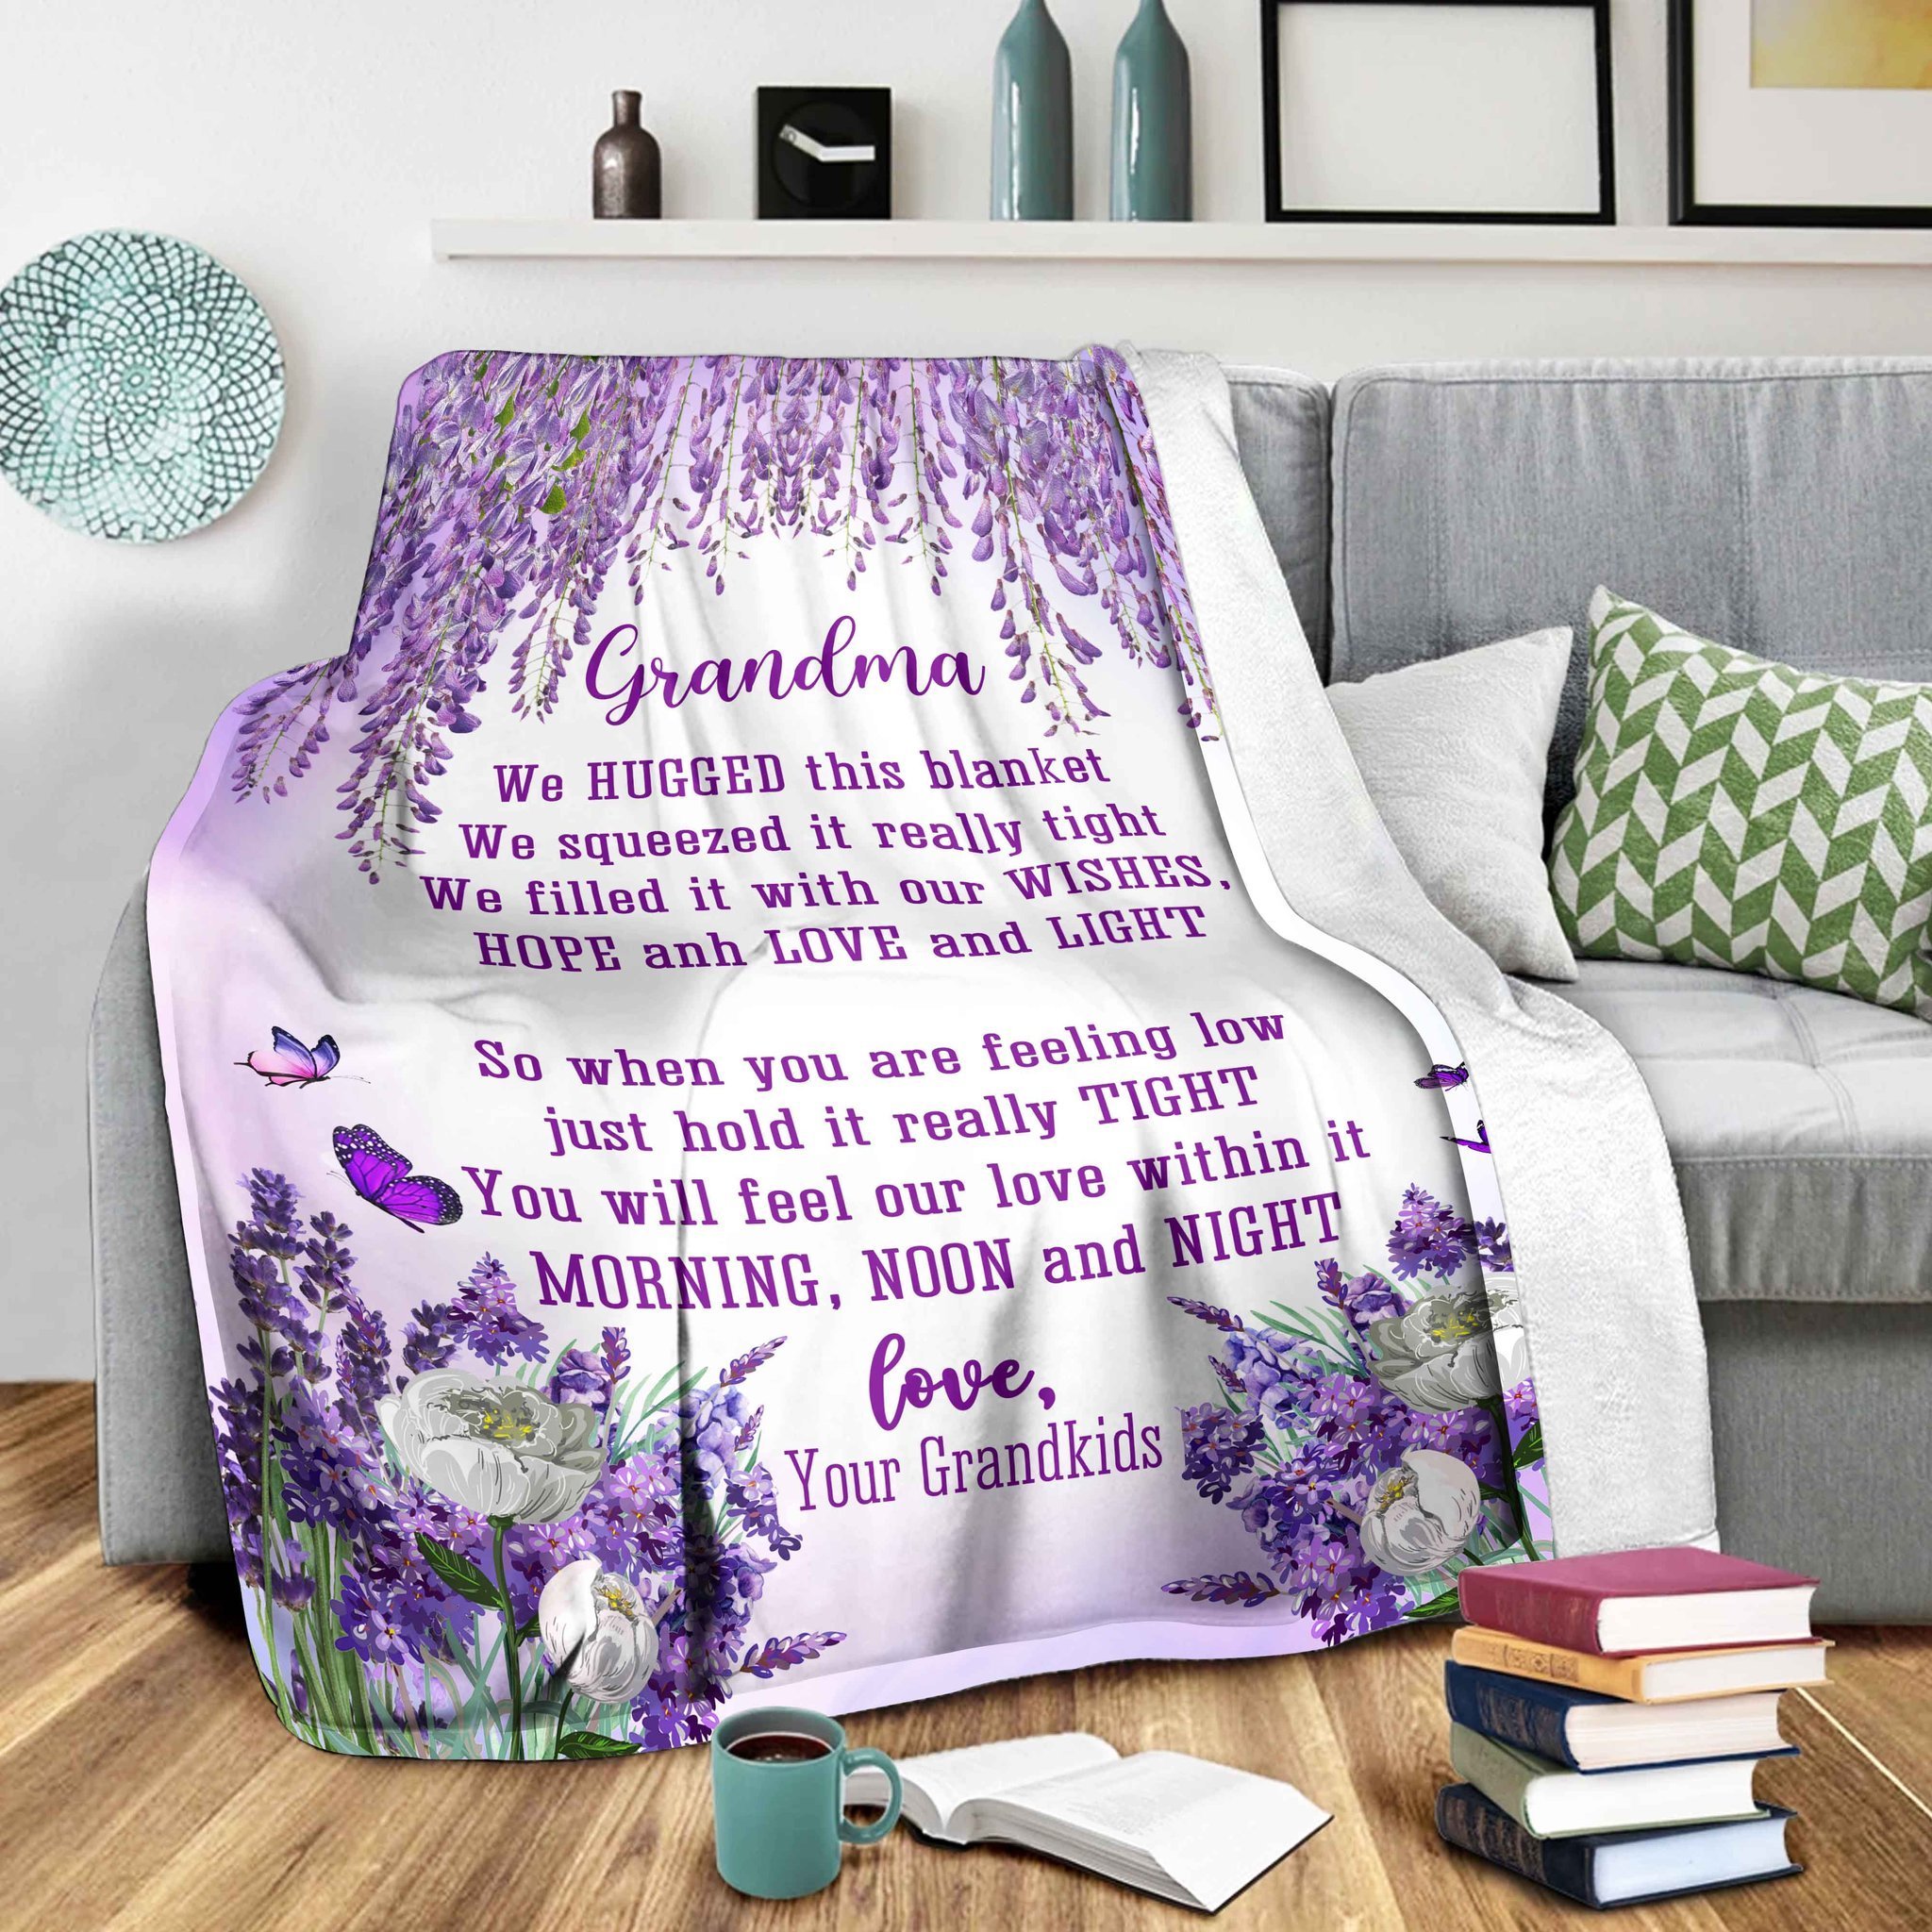 BLANKET FOT GRANDMA - GIFT FOR BIRTHDAY, CHRISTMAS - WHEN YOU'RE FELLING LOW JUST HOLD THIS BLANKET